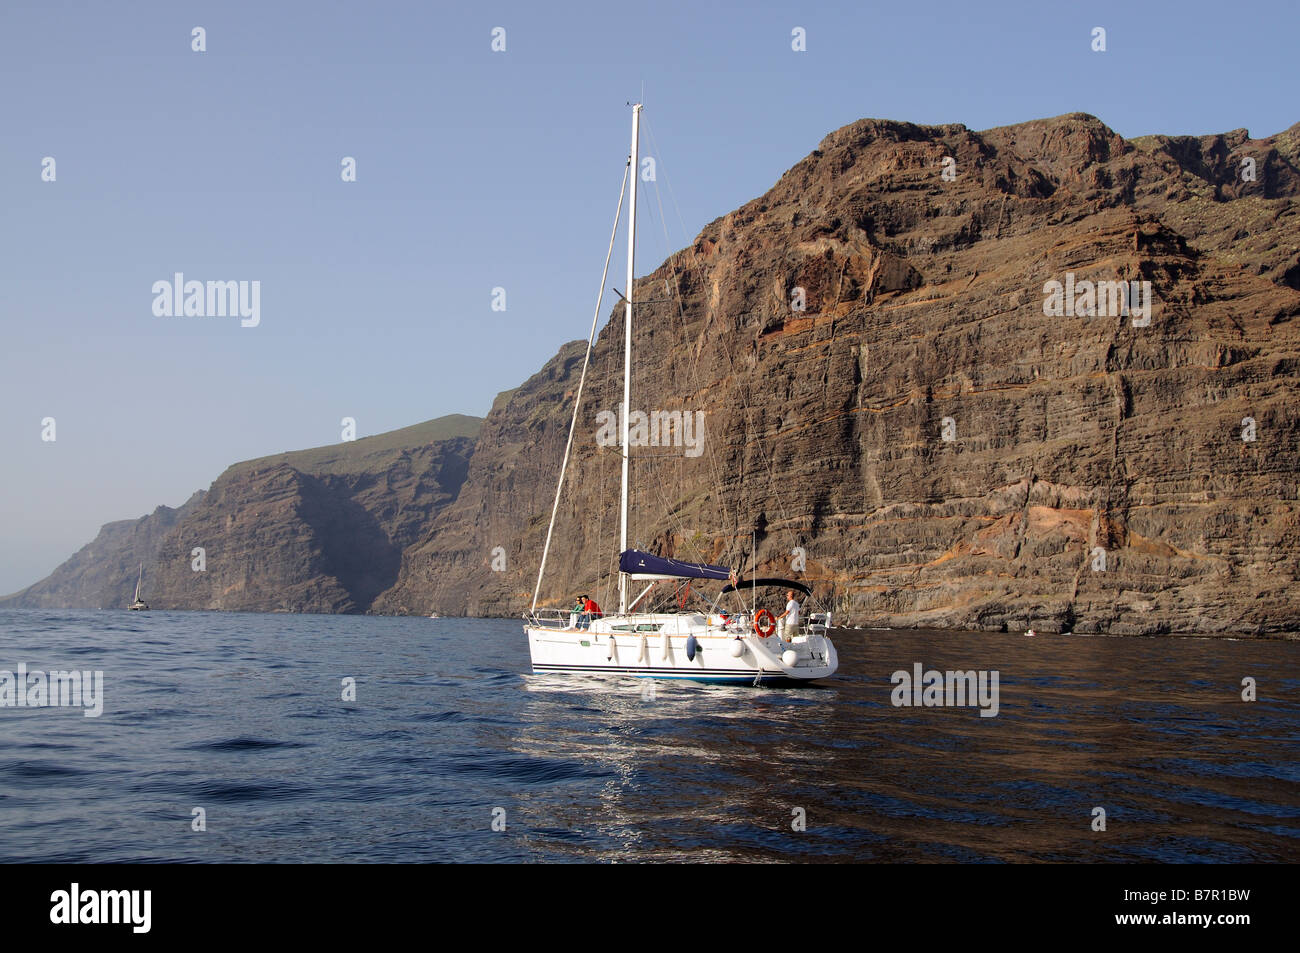 Sailing boat excursion along the Los Gigantes Cliffs coast of southern Tenerife Canary Islands Stock Photo